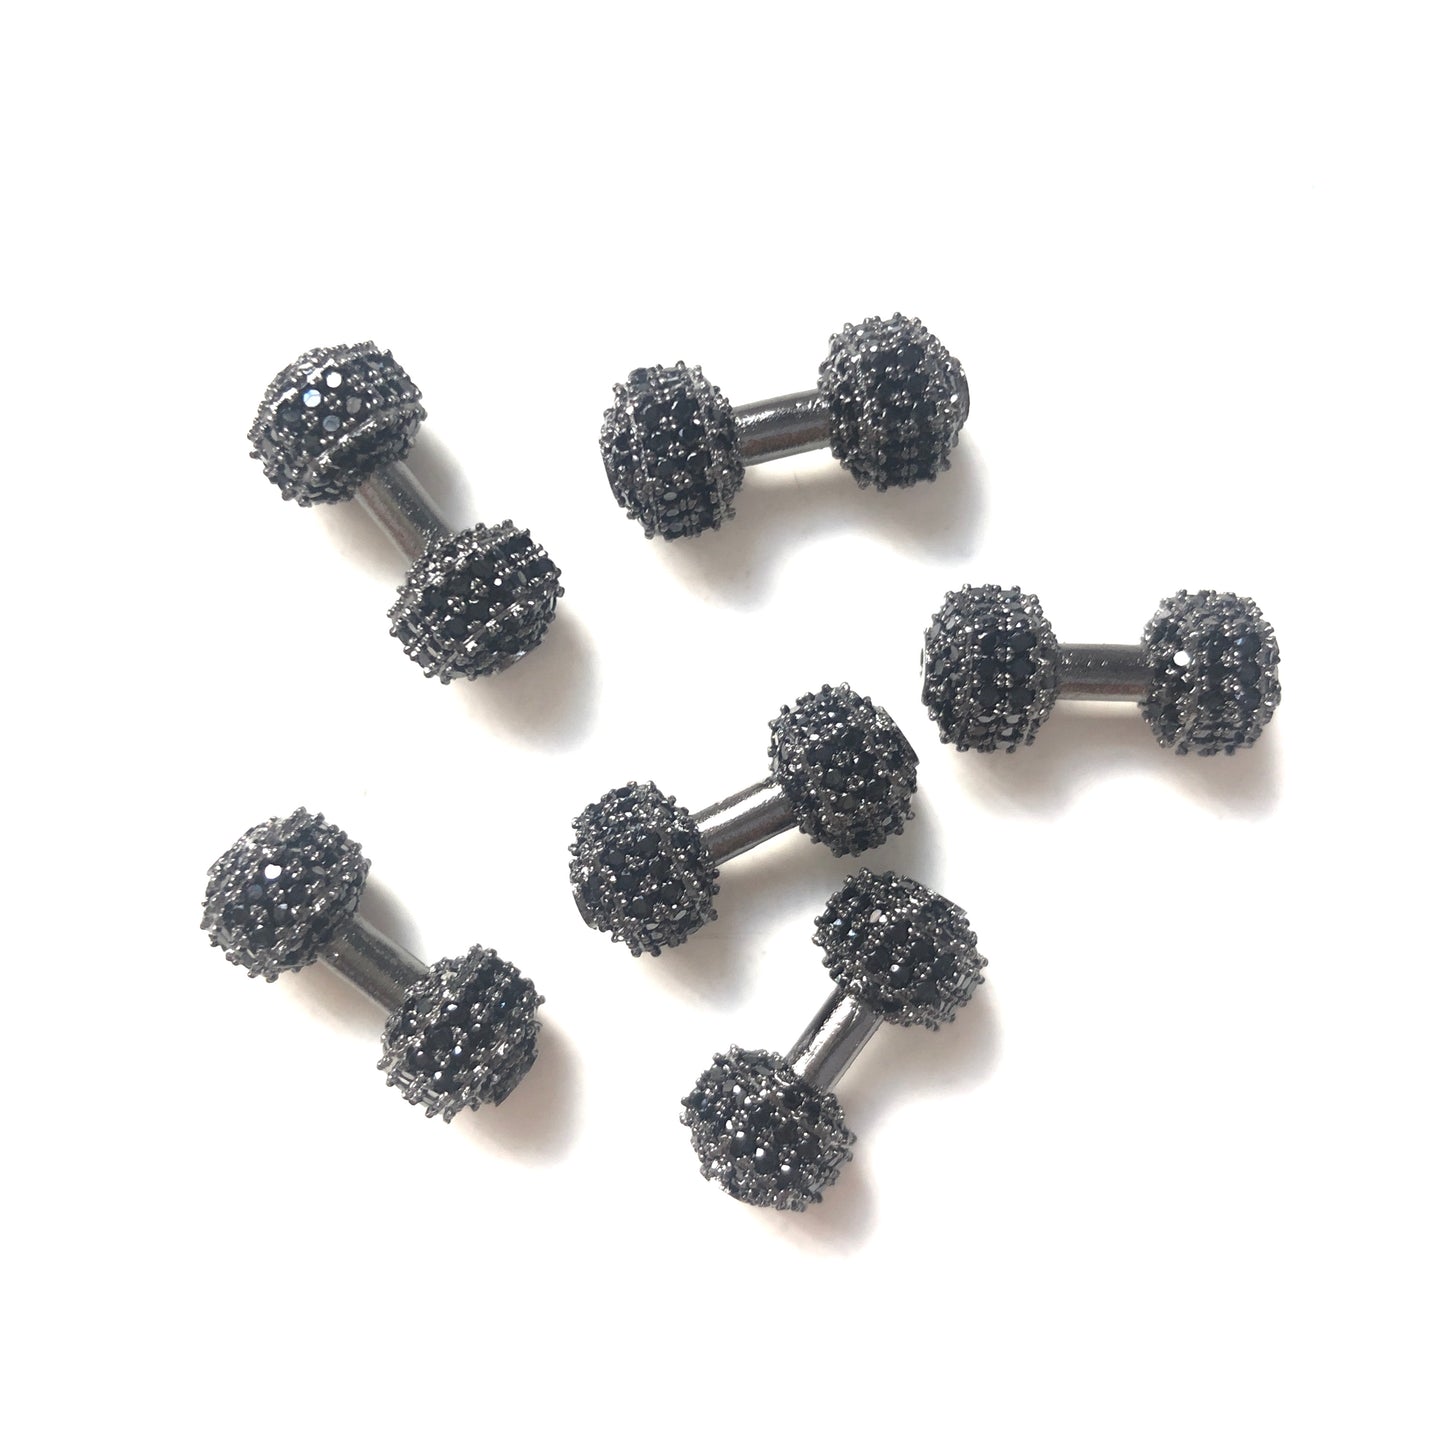 10pcs/lot 18*7.8mm CZ Paved Dumbbell Spacers Black on Black CZ Paved Spacers Charms Beads Beyond